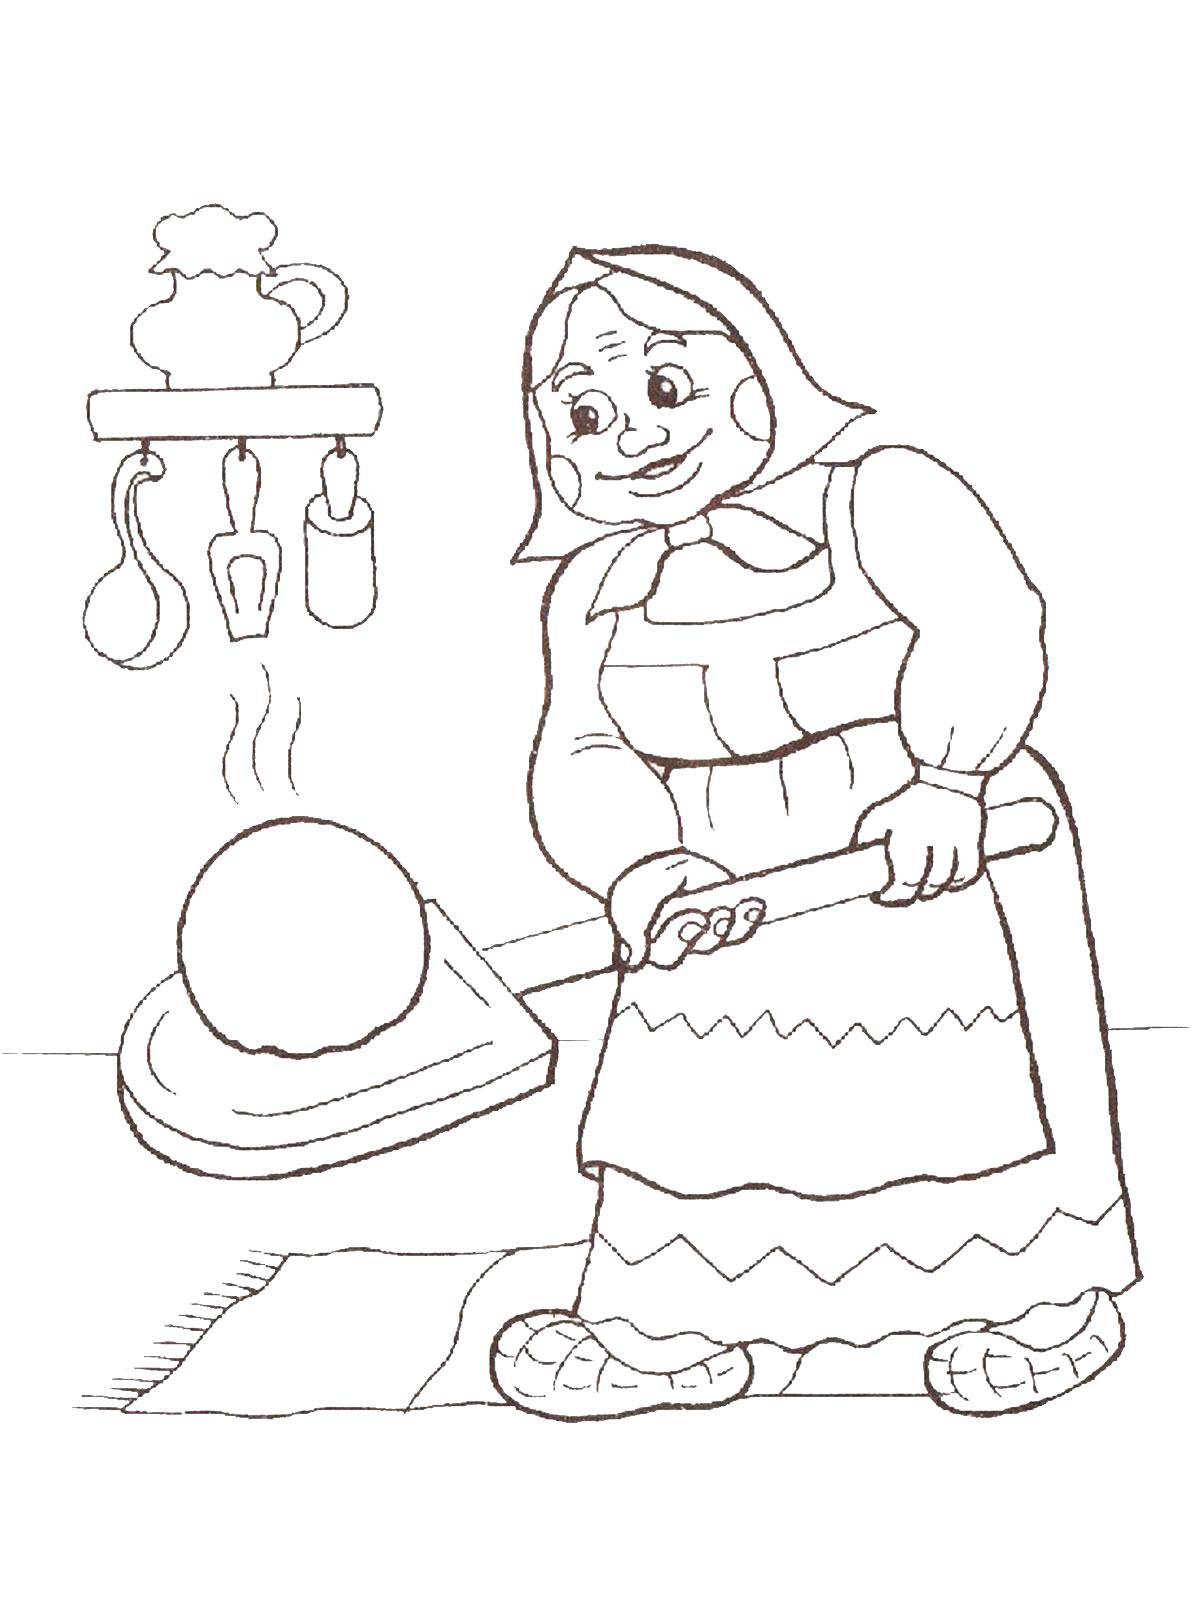 Coloring Baked bun. Category gingerbread man . Tags:  Fairy Tales, Gingerbread Man.